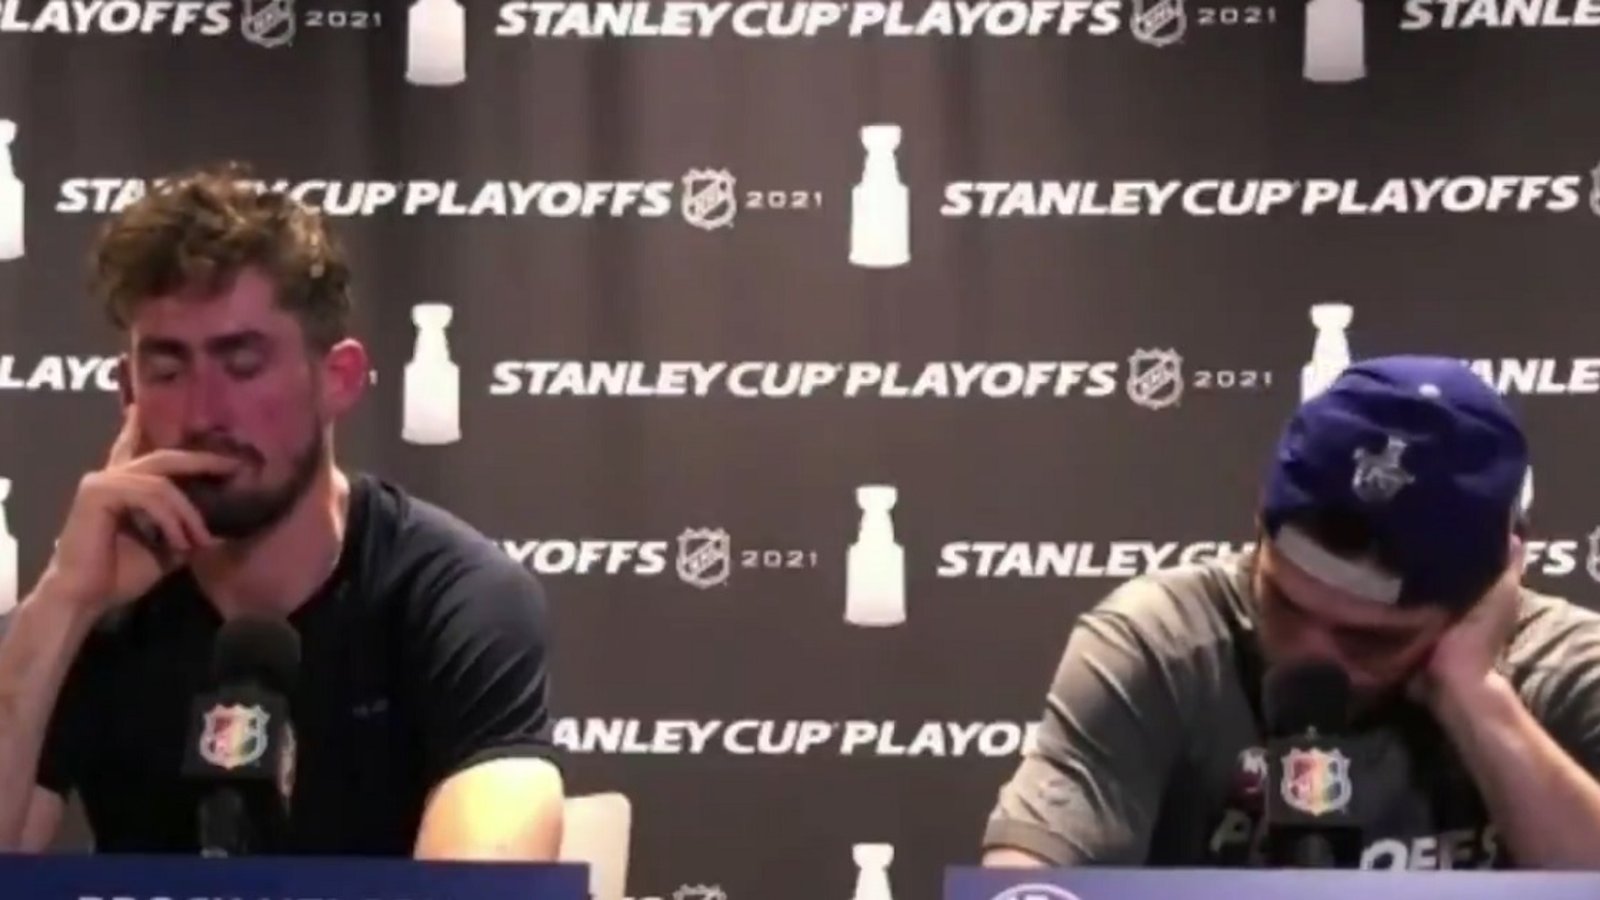 Game 7 loss brings Mathew Barzal to tears in post game press conference.